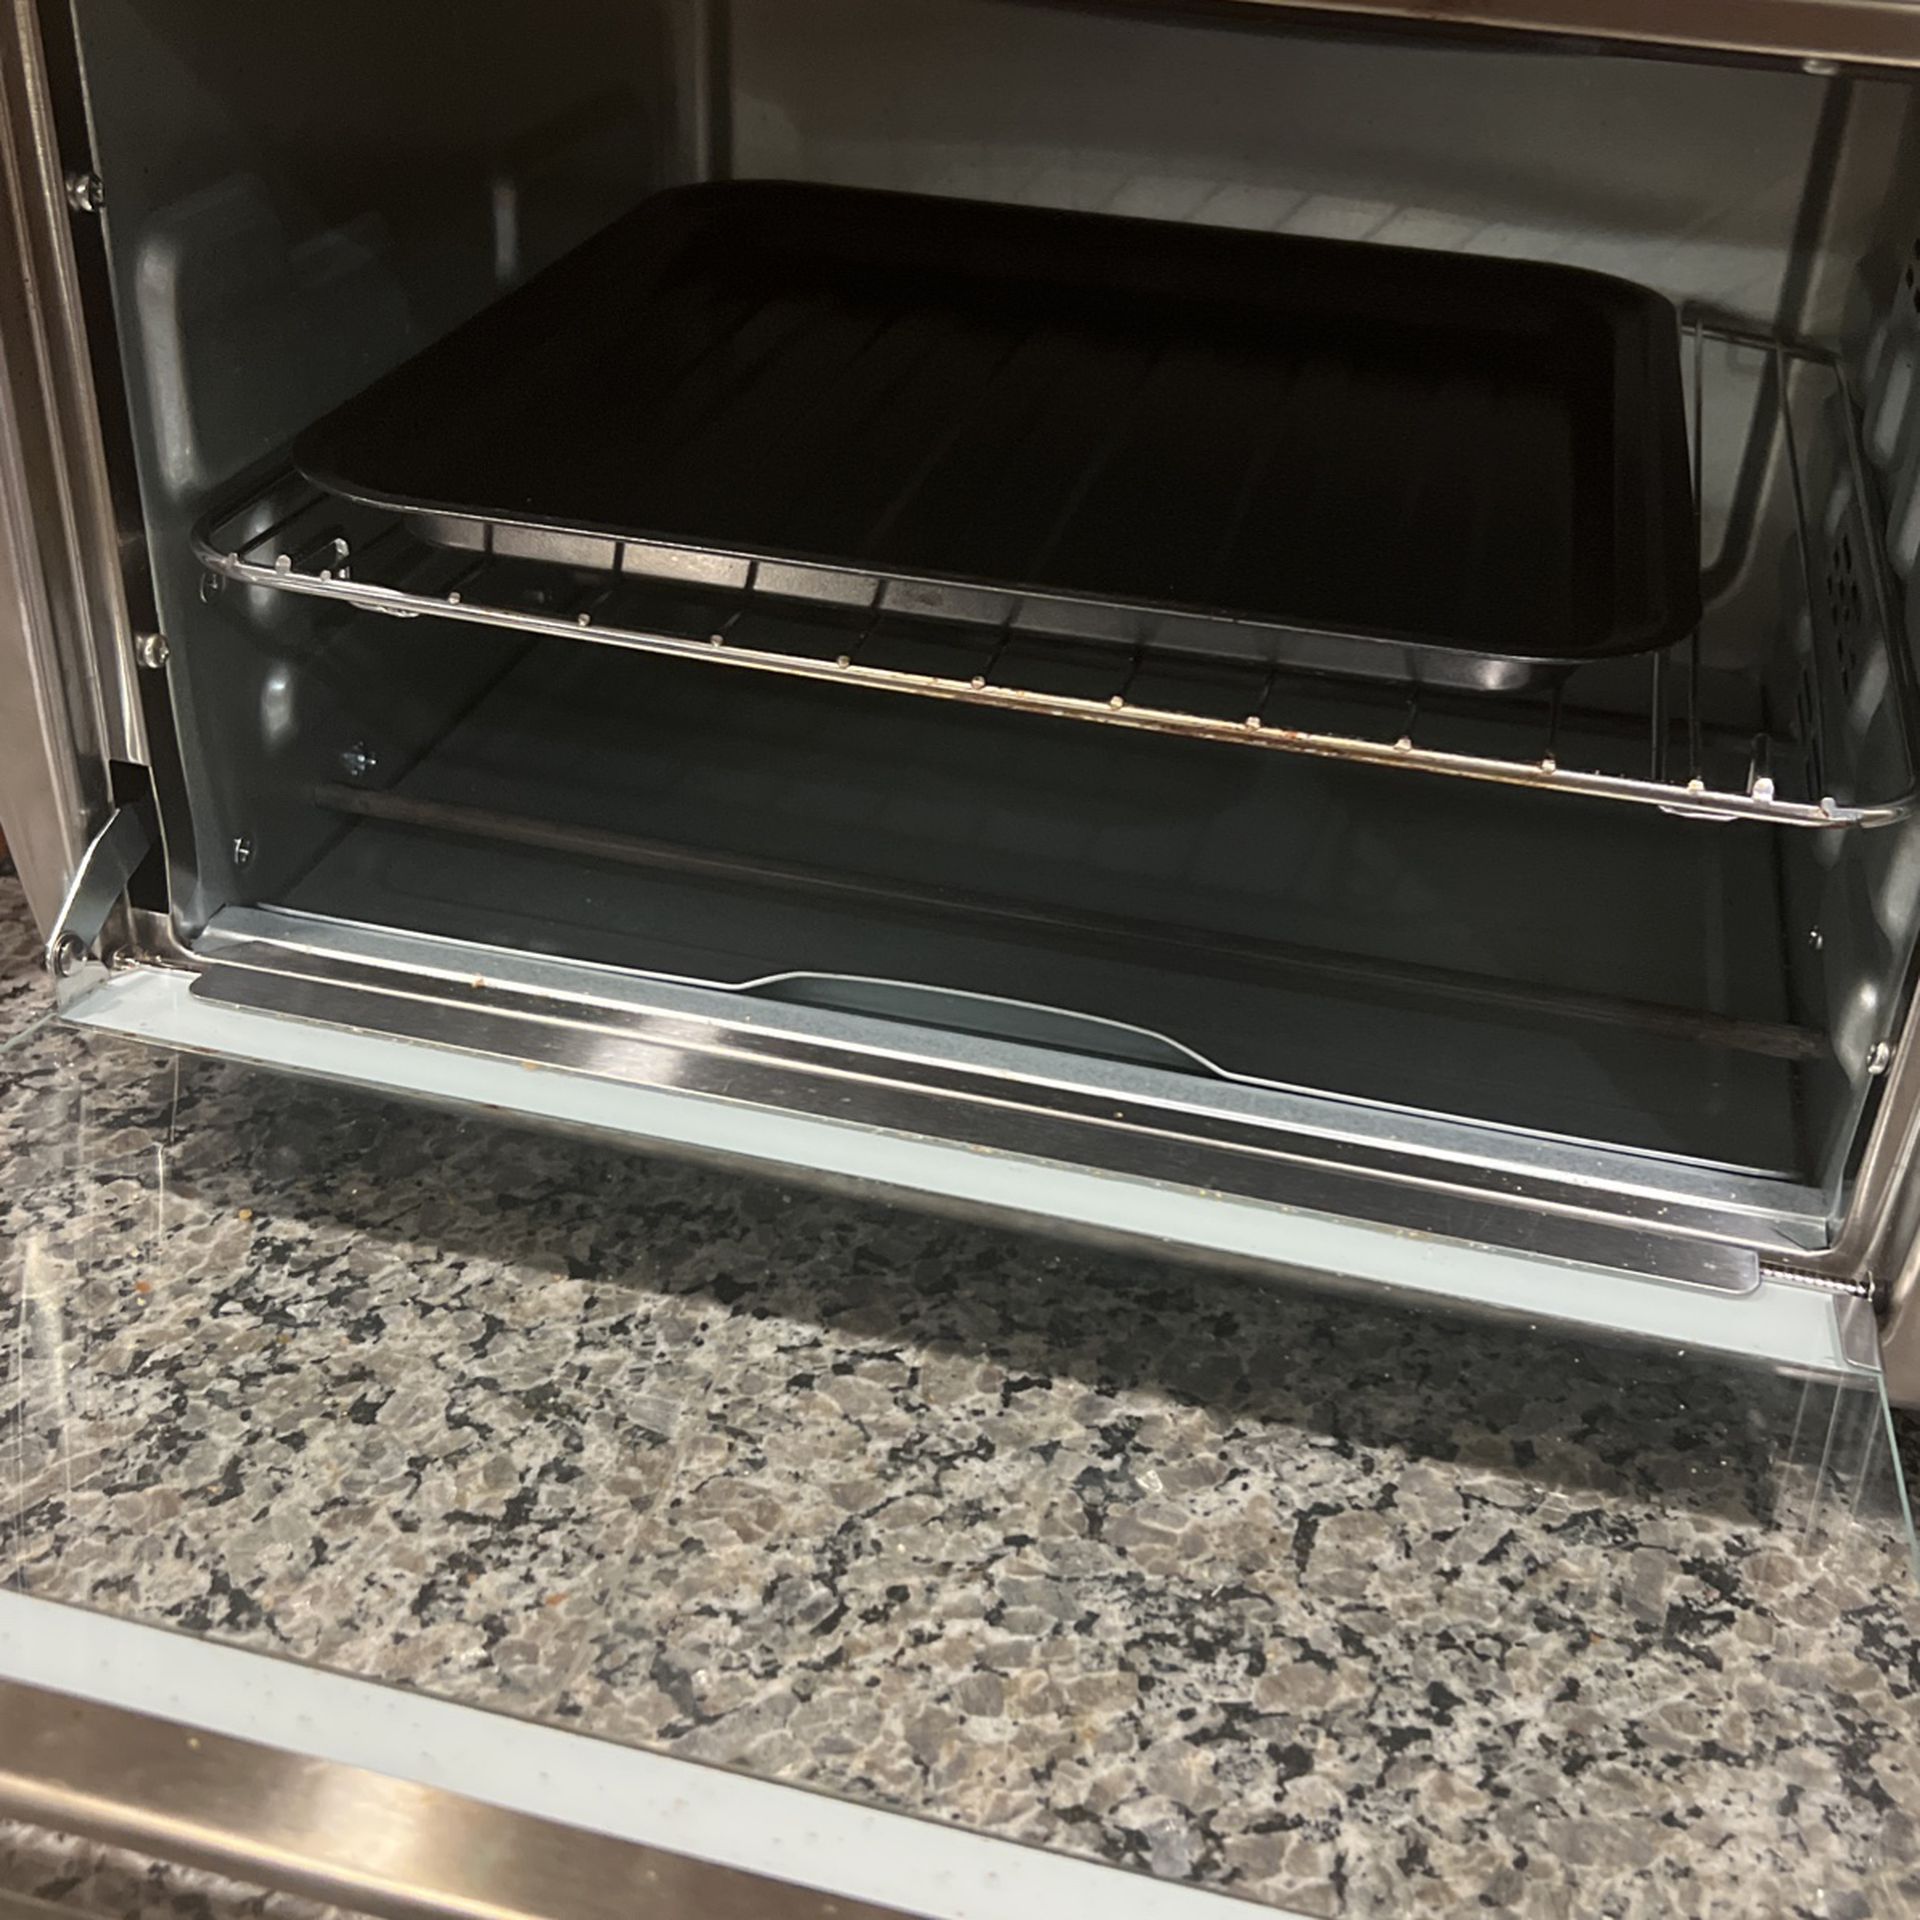 Oster Designed For Life Extra-Large Convection Countertop Toaster Oven New  in Sealed Box for Sale in Las Vegas, NV - OfferUp